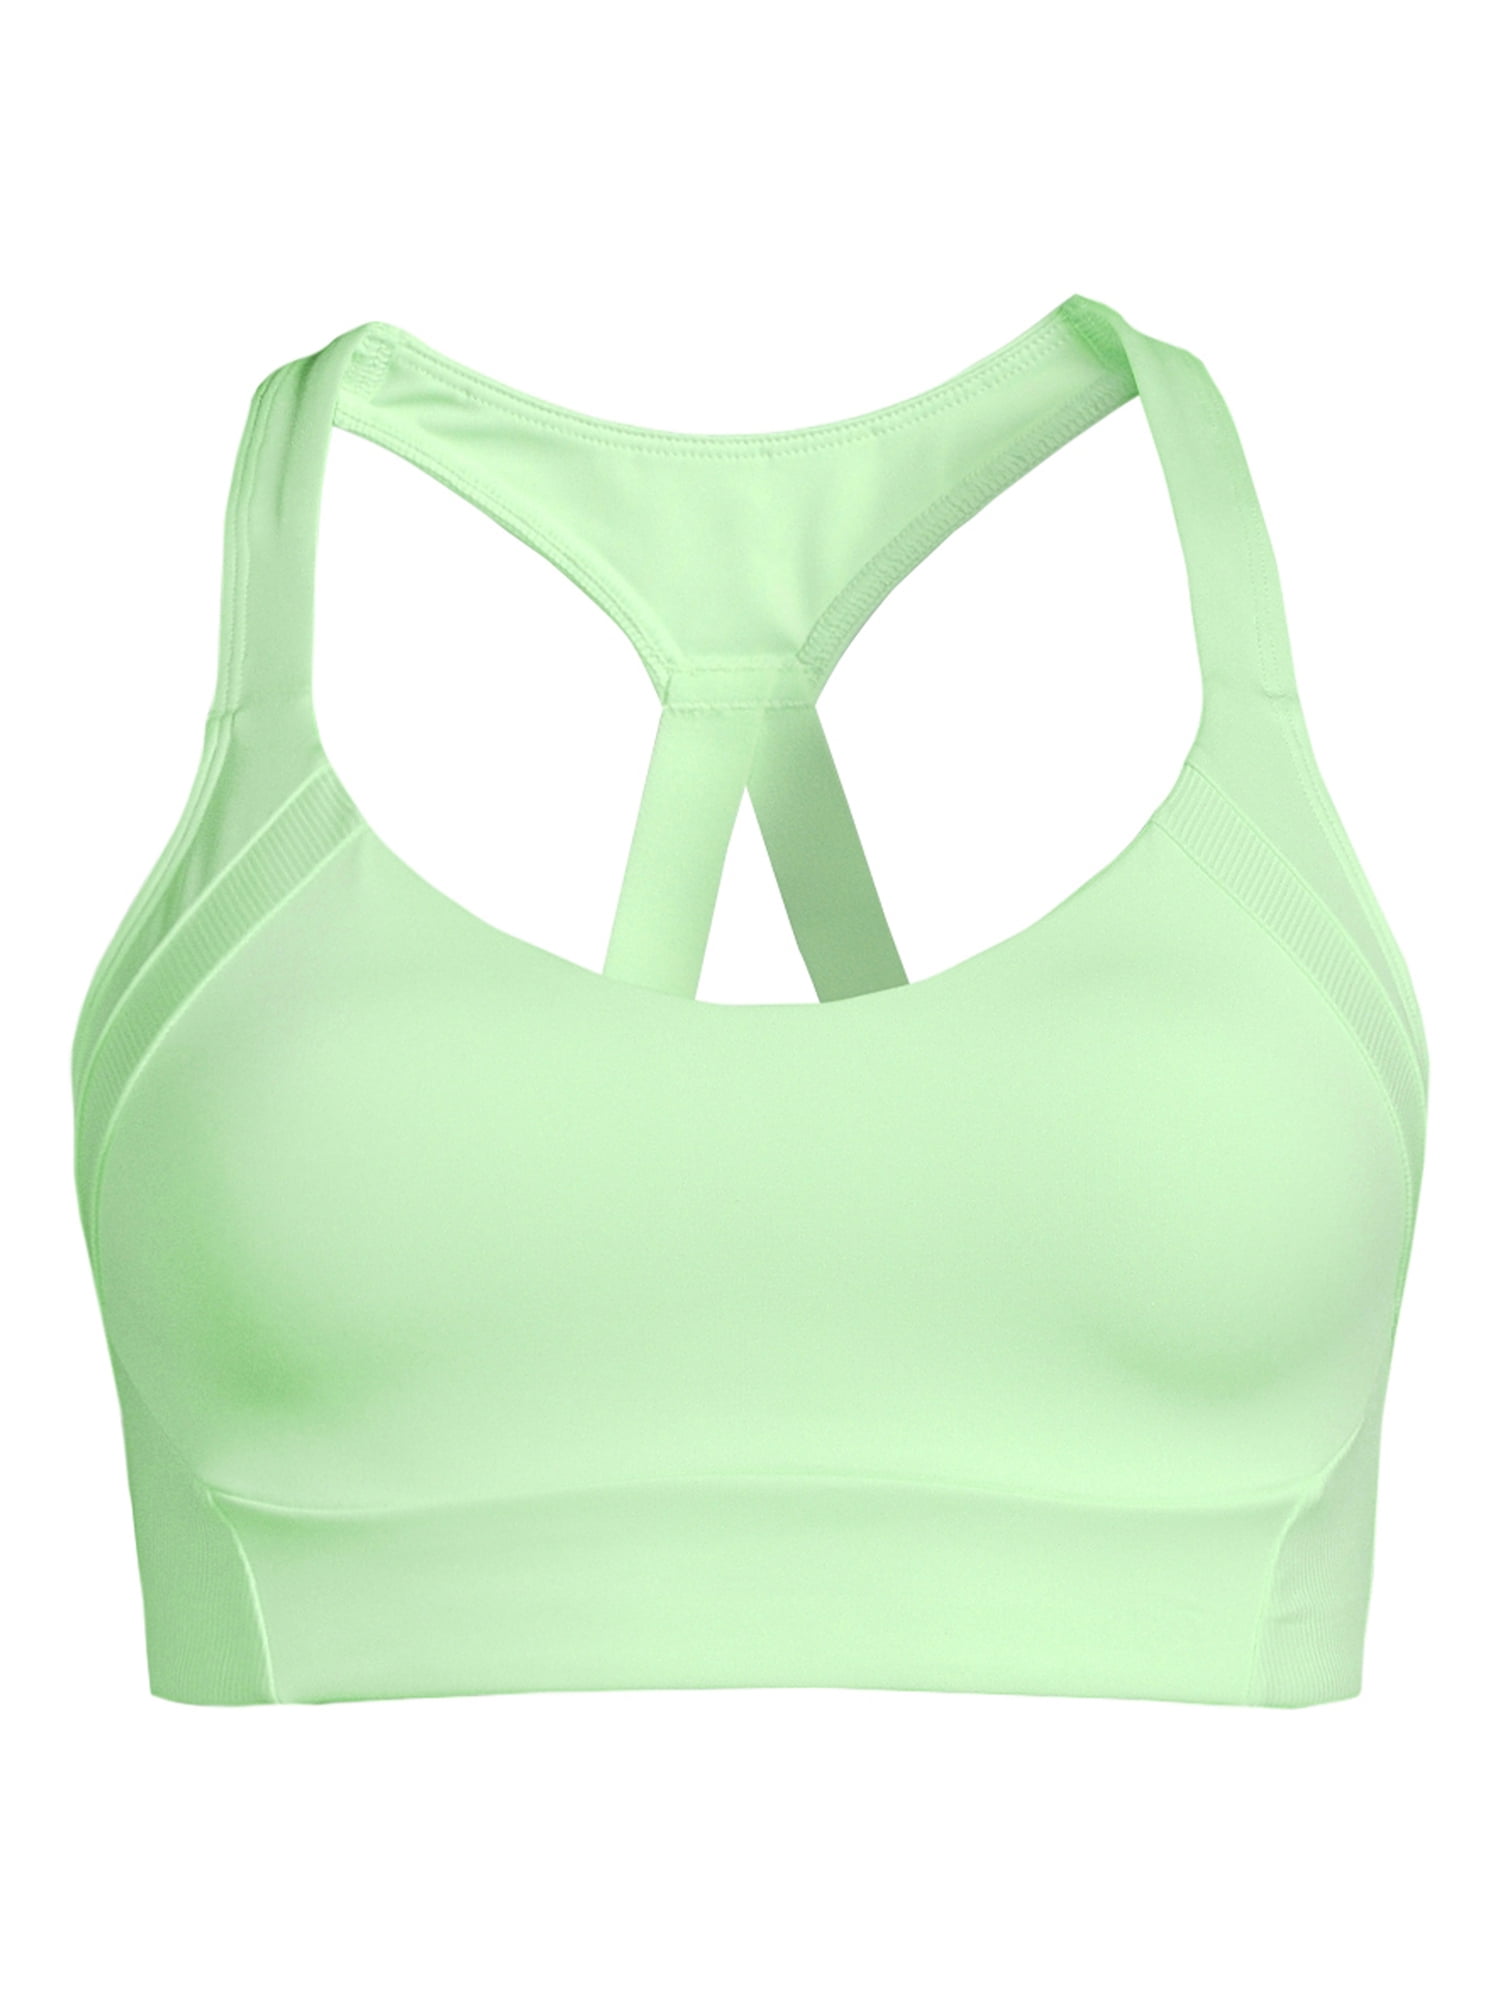 Racer Back Sports Bra Pack of 2 - BITZ ( Lucite Green and Lime Punch )